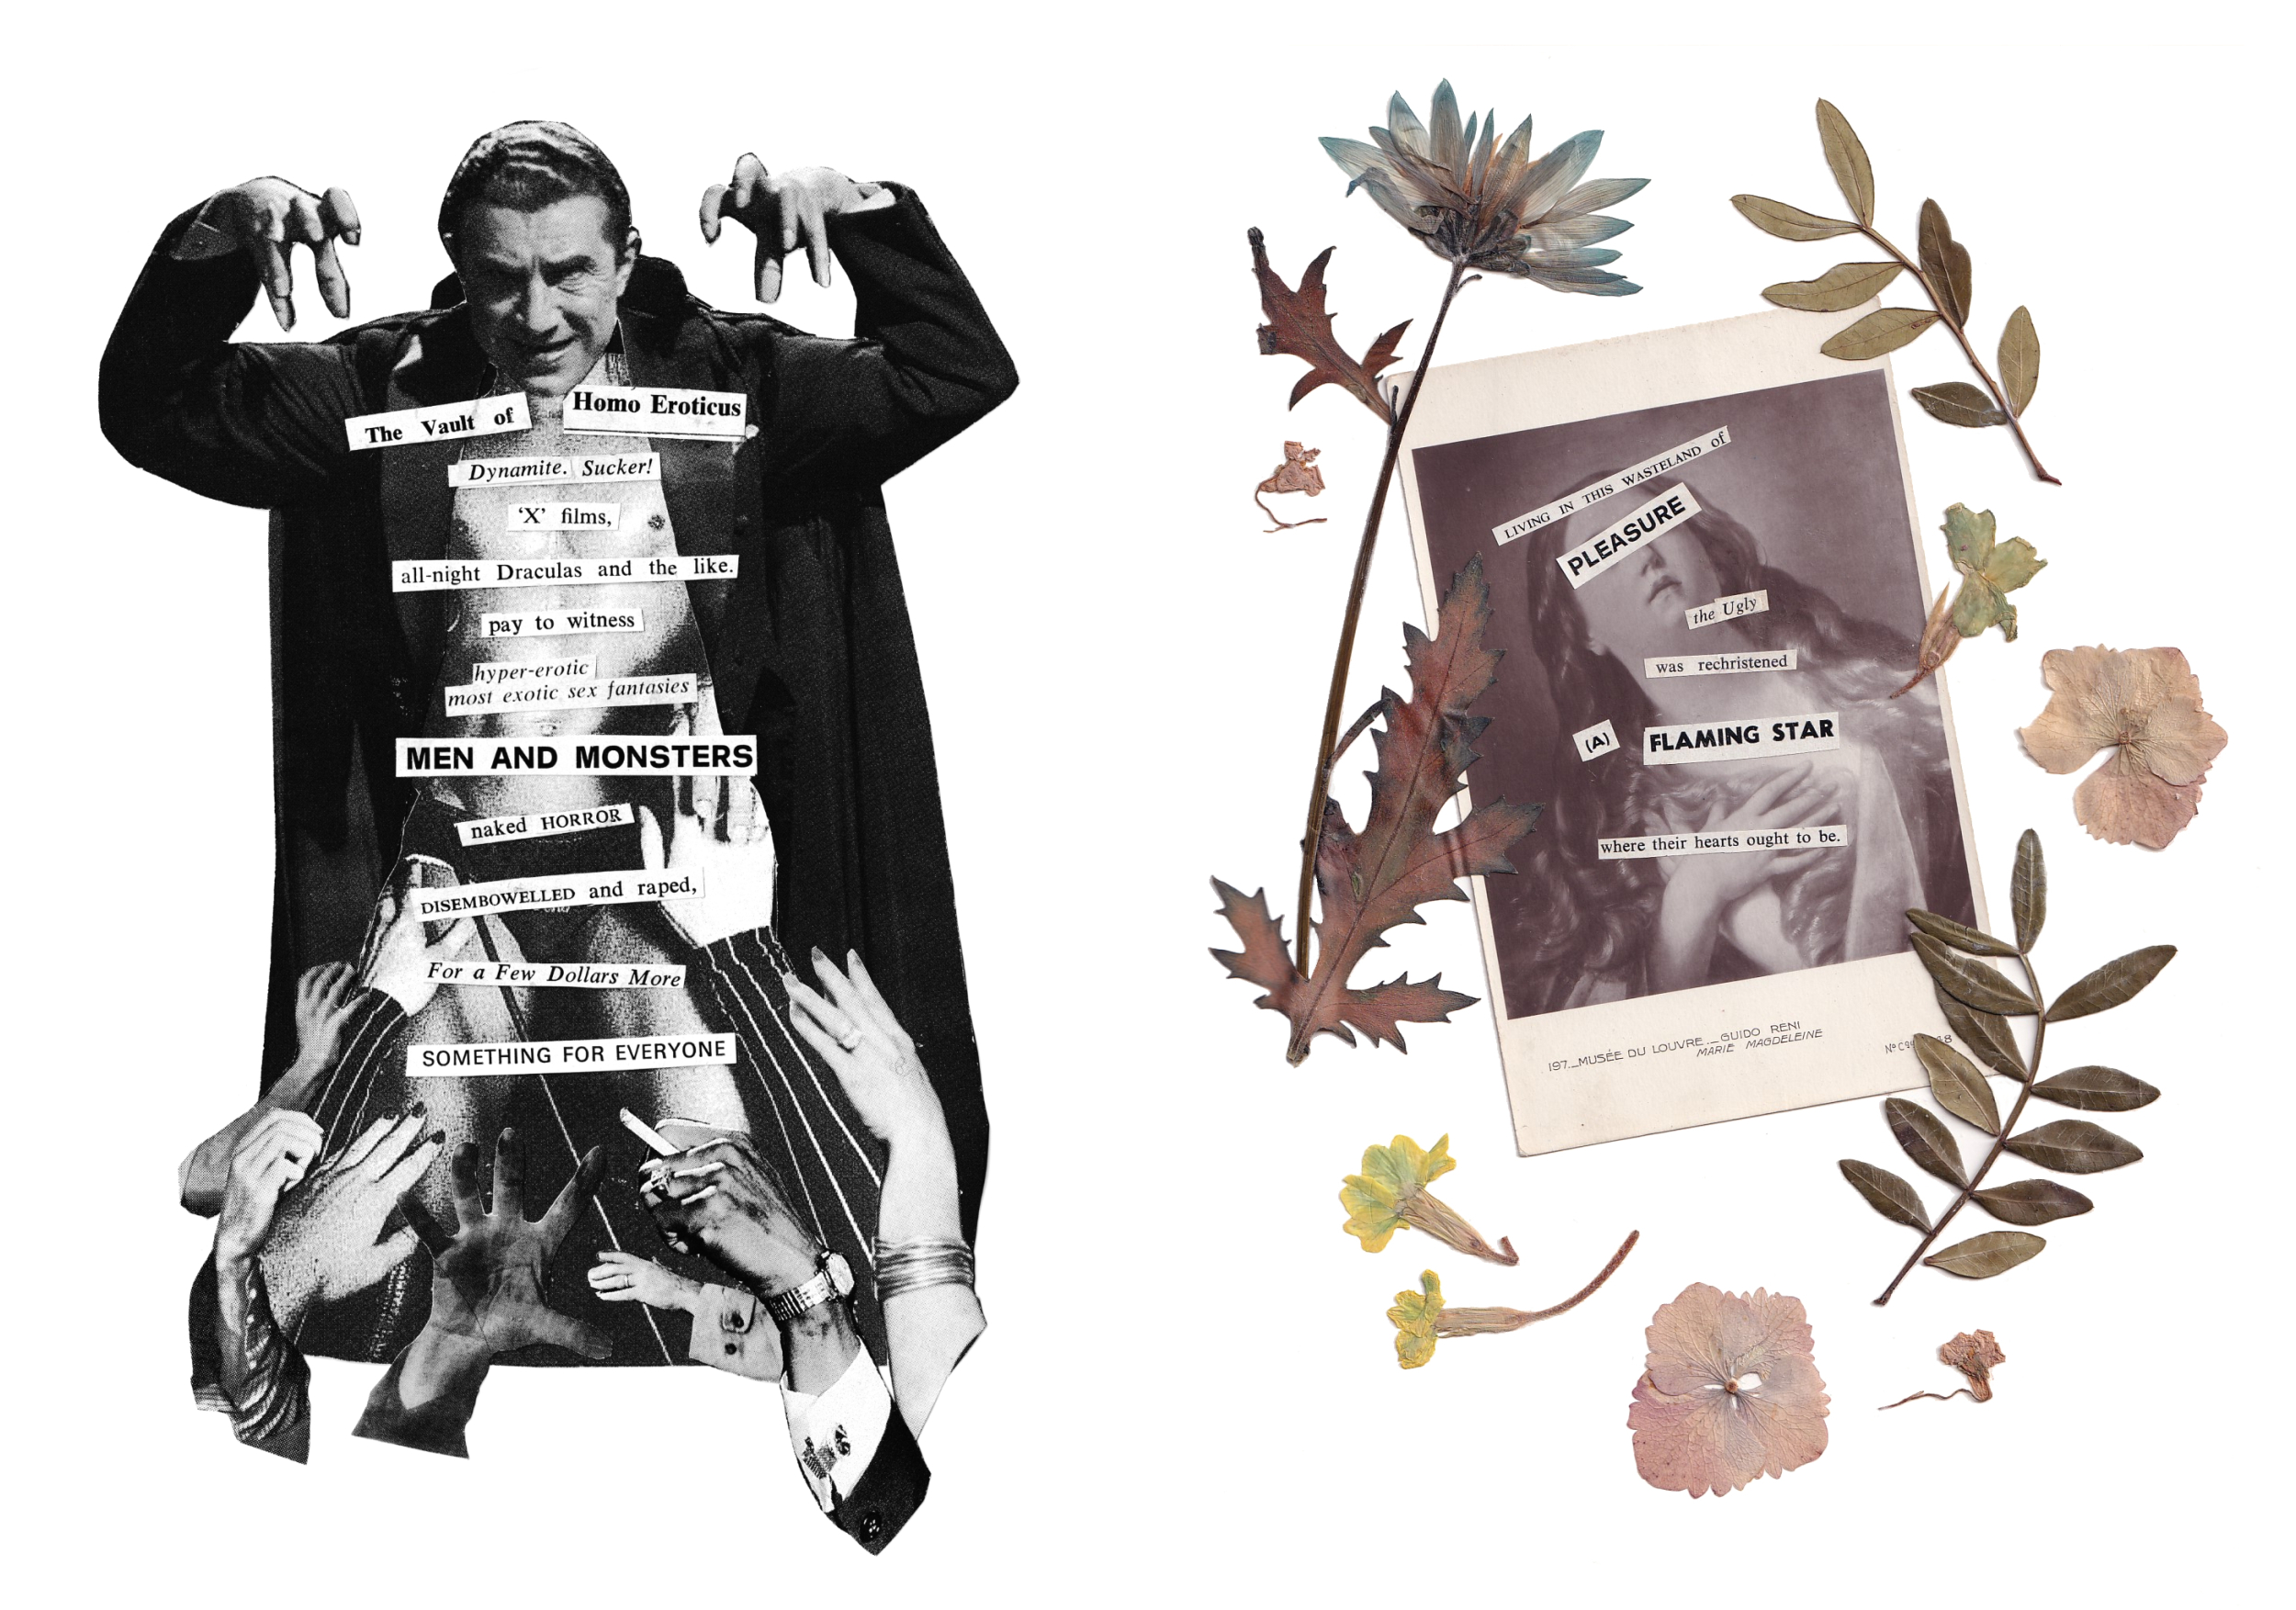 (Left) Bela Lugosi leers menacingly, cape open to reveal a chiselled torso being groped by disembodied hands. (Right) A faded postcard of Reni's Mary Magdalene surrounded by pressed flowers.